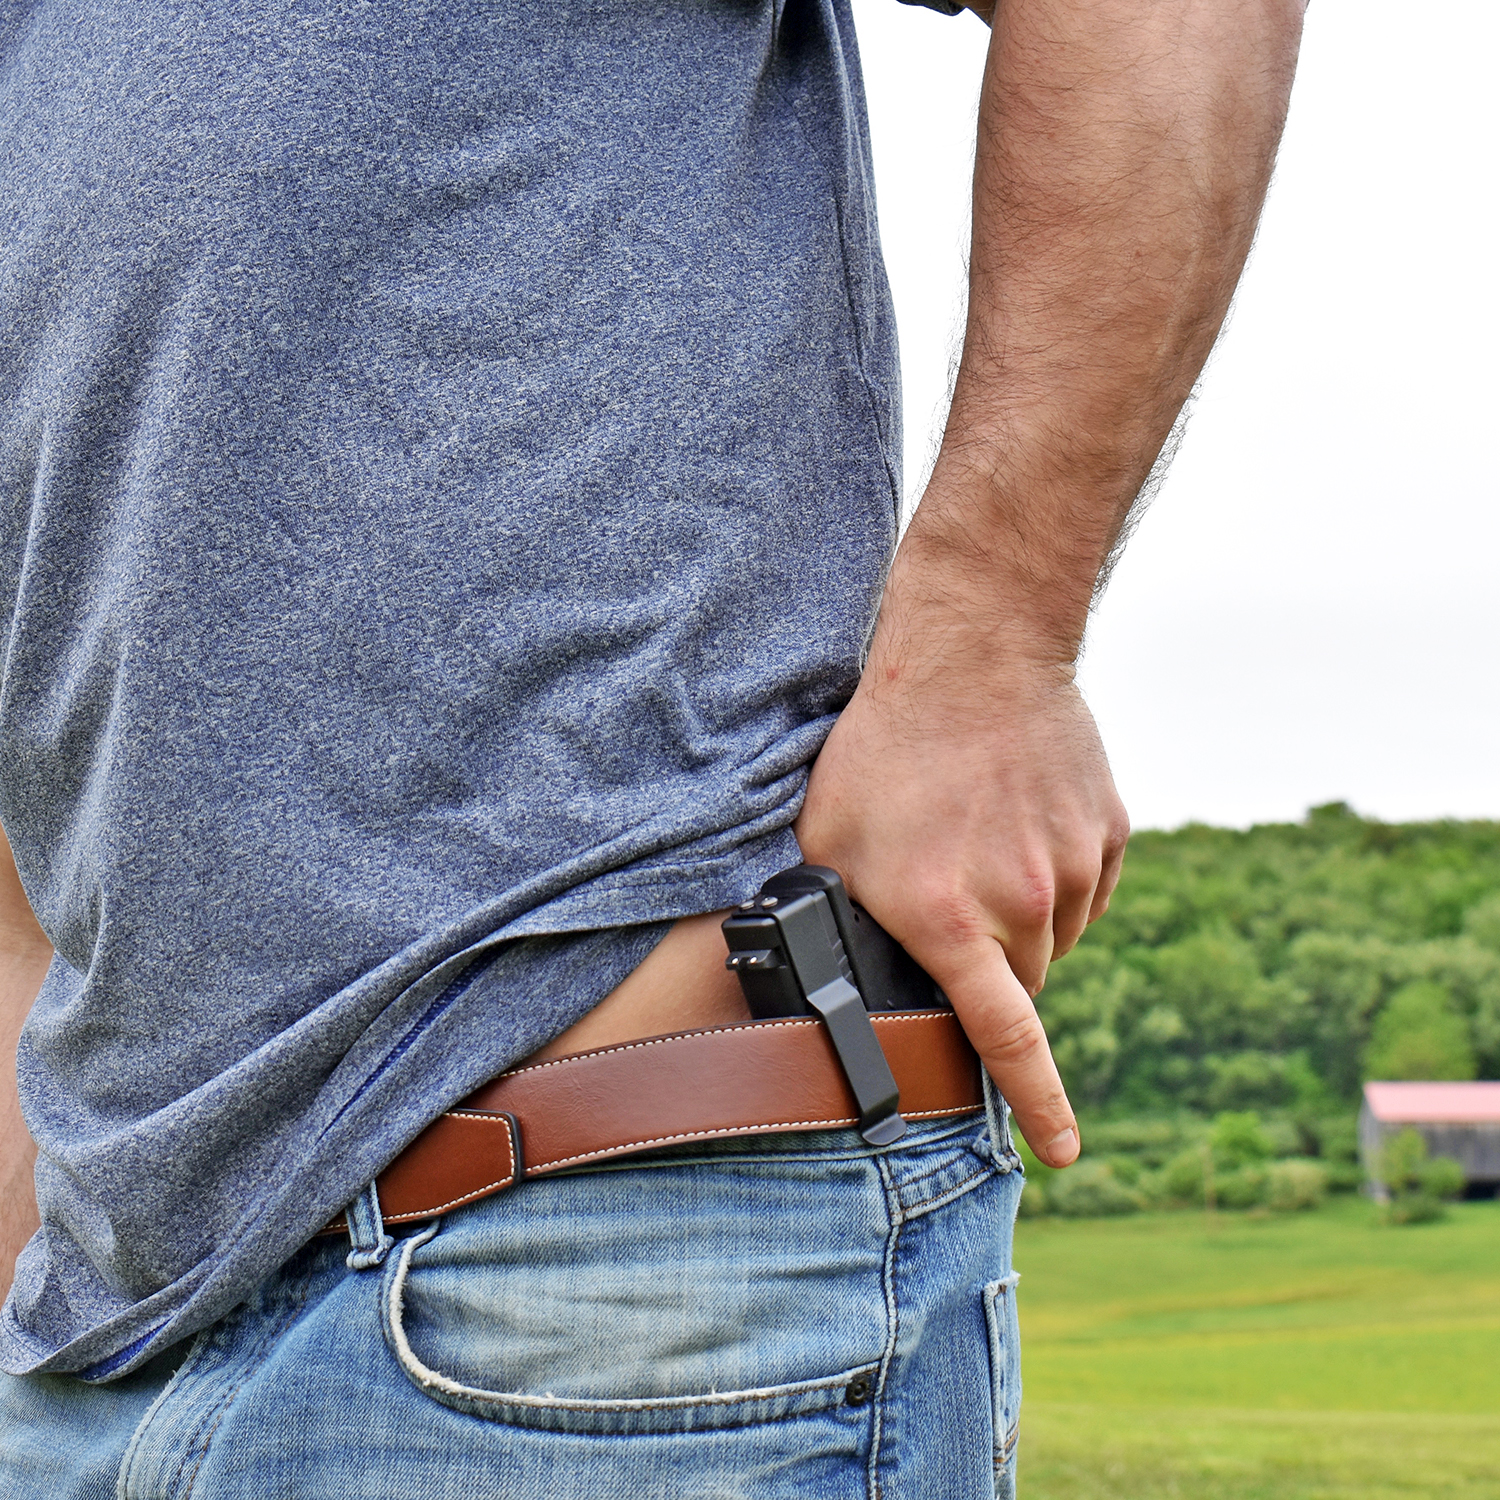 A Beginner's Guide to Concealed Carry: Understanding Different